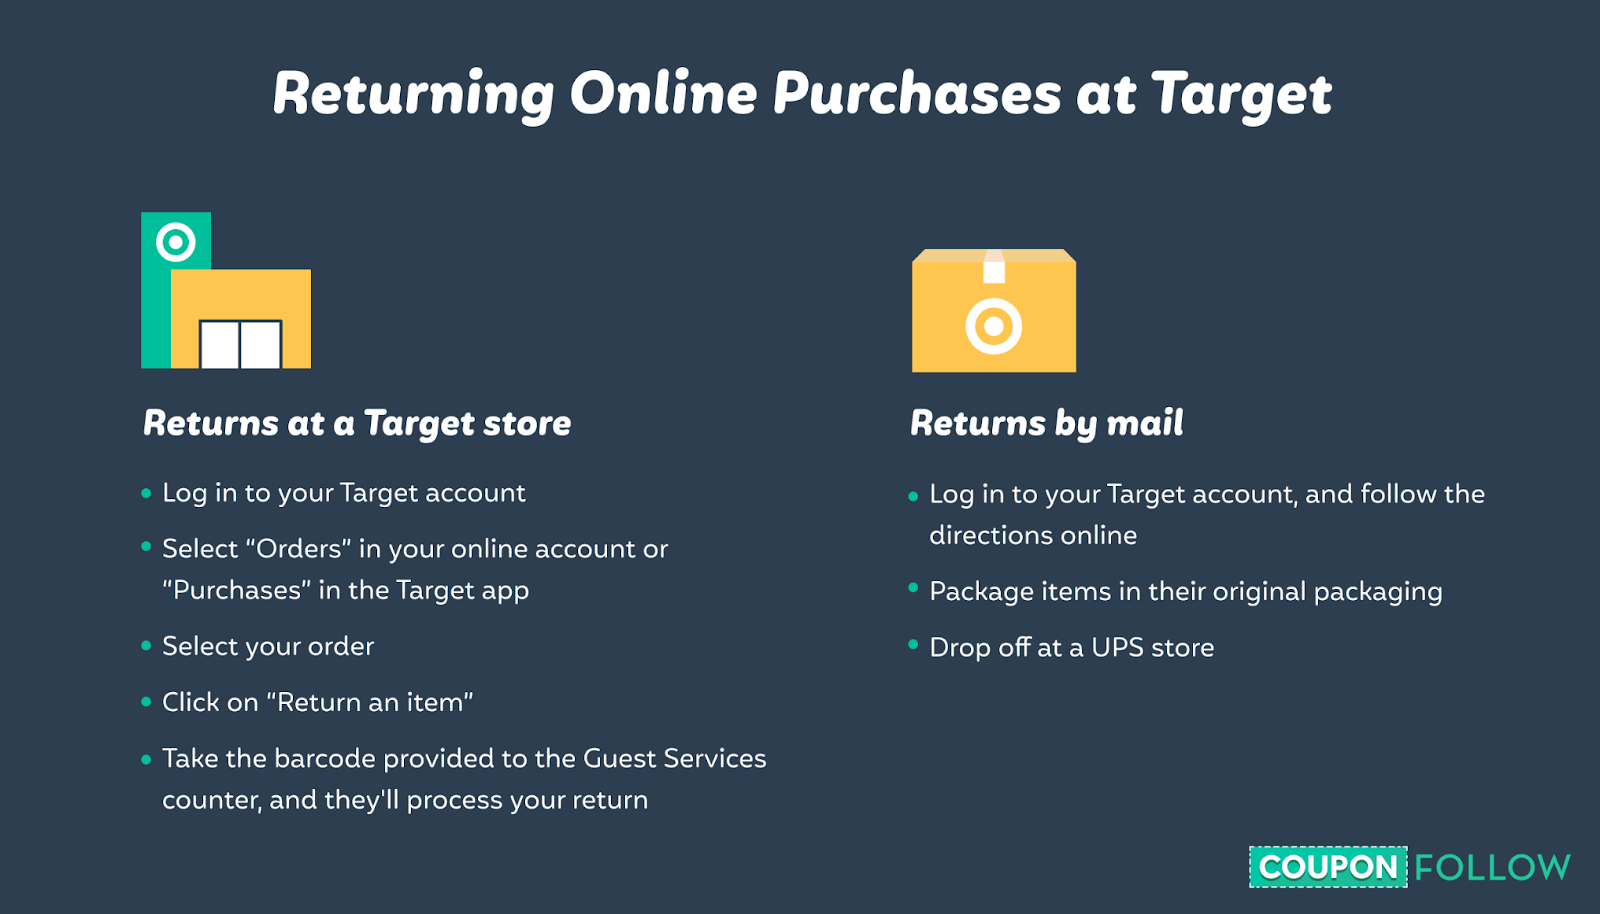 How to return items purchased online to Target